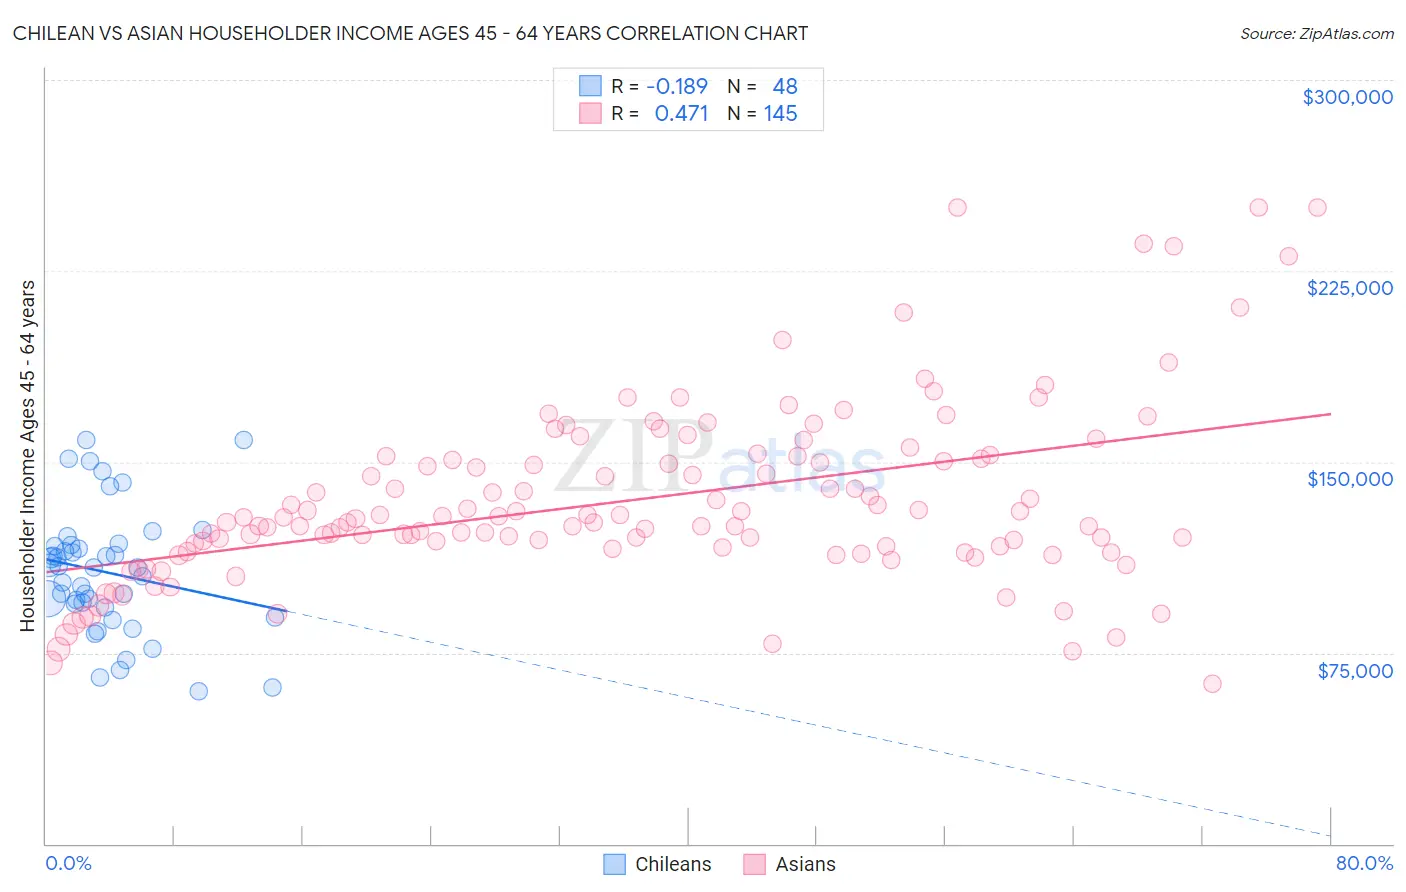 Chilean vs Asian Householder Income Ages 45 - 64 years